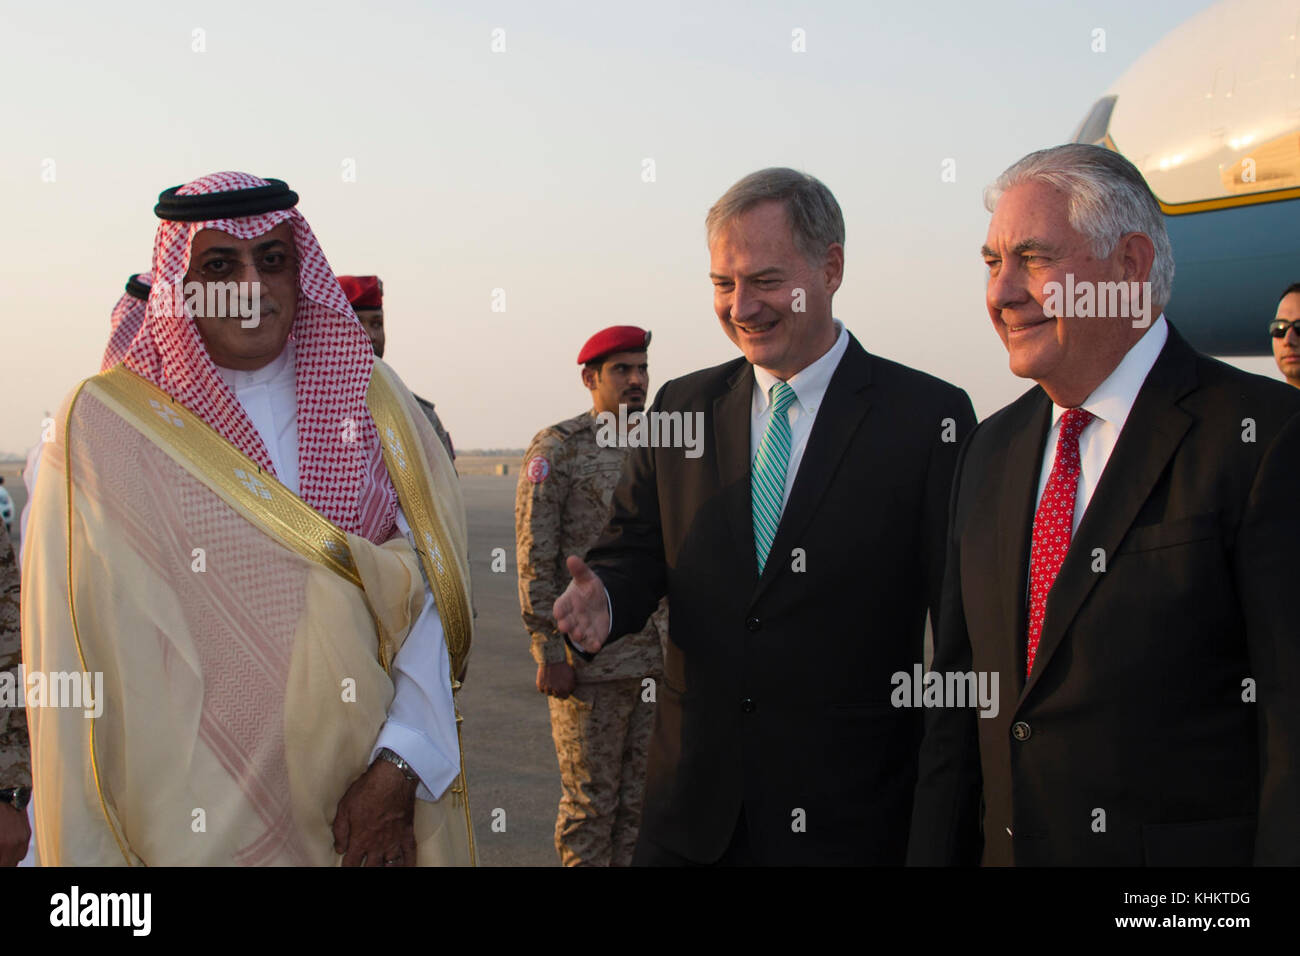 U.S. Secretary of State Rex Tillerson is Greeted by U.S. Charge d'Affaires Christopher Henzel and Saudi Undersecretary for the Ministry of Foreign Affairs for Protocol Affairs Azzam Al-Gain at the King Salman Air Base upon arrival in Riyadh, Saudi Arabia on October 21, 2017. Stock Photo